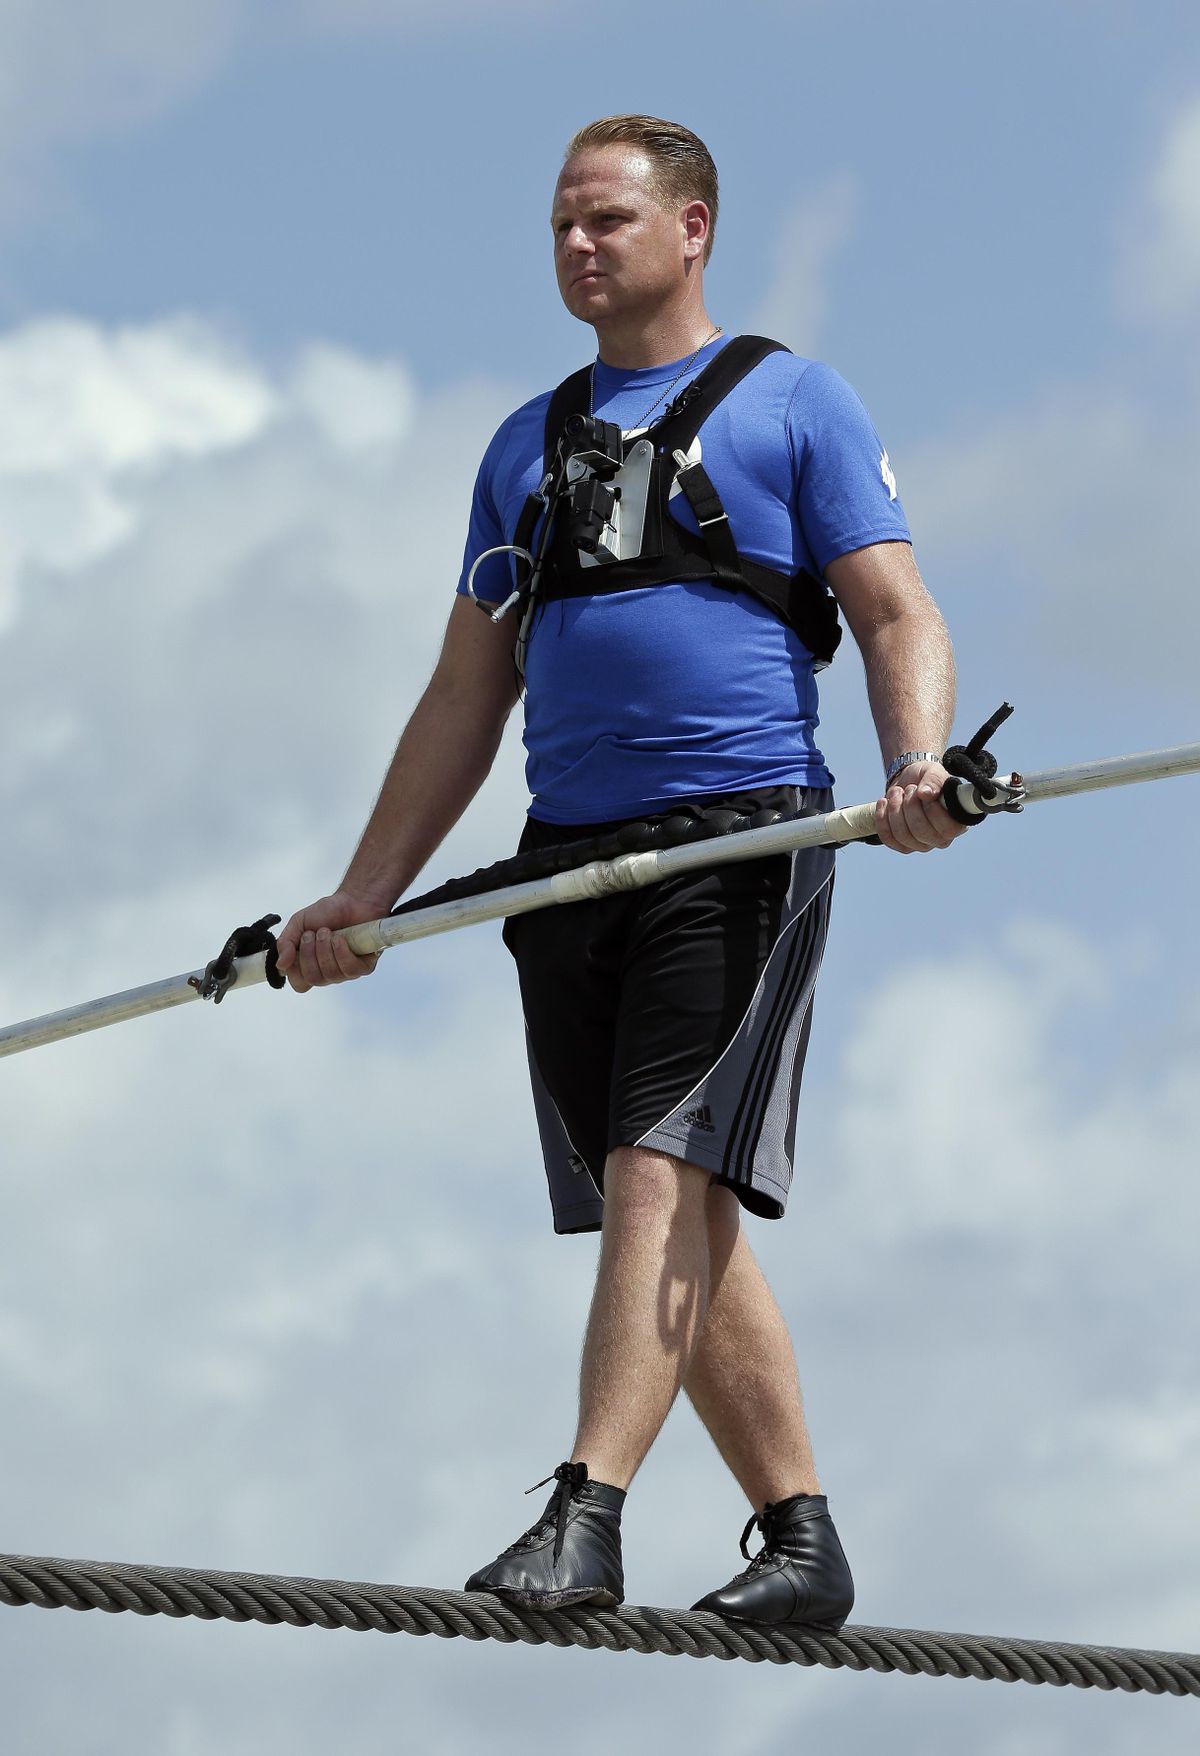 In this 2013 file photo, high wire performer Nik Wallenda practices in Sarasota, Fla. Five circus performers were seriously injured Wednesday while practicing a high-wire act in Florida. The accident involved Wallenda and several members of his family. Authorities say Wallenda was not injured. (Chris O